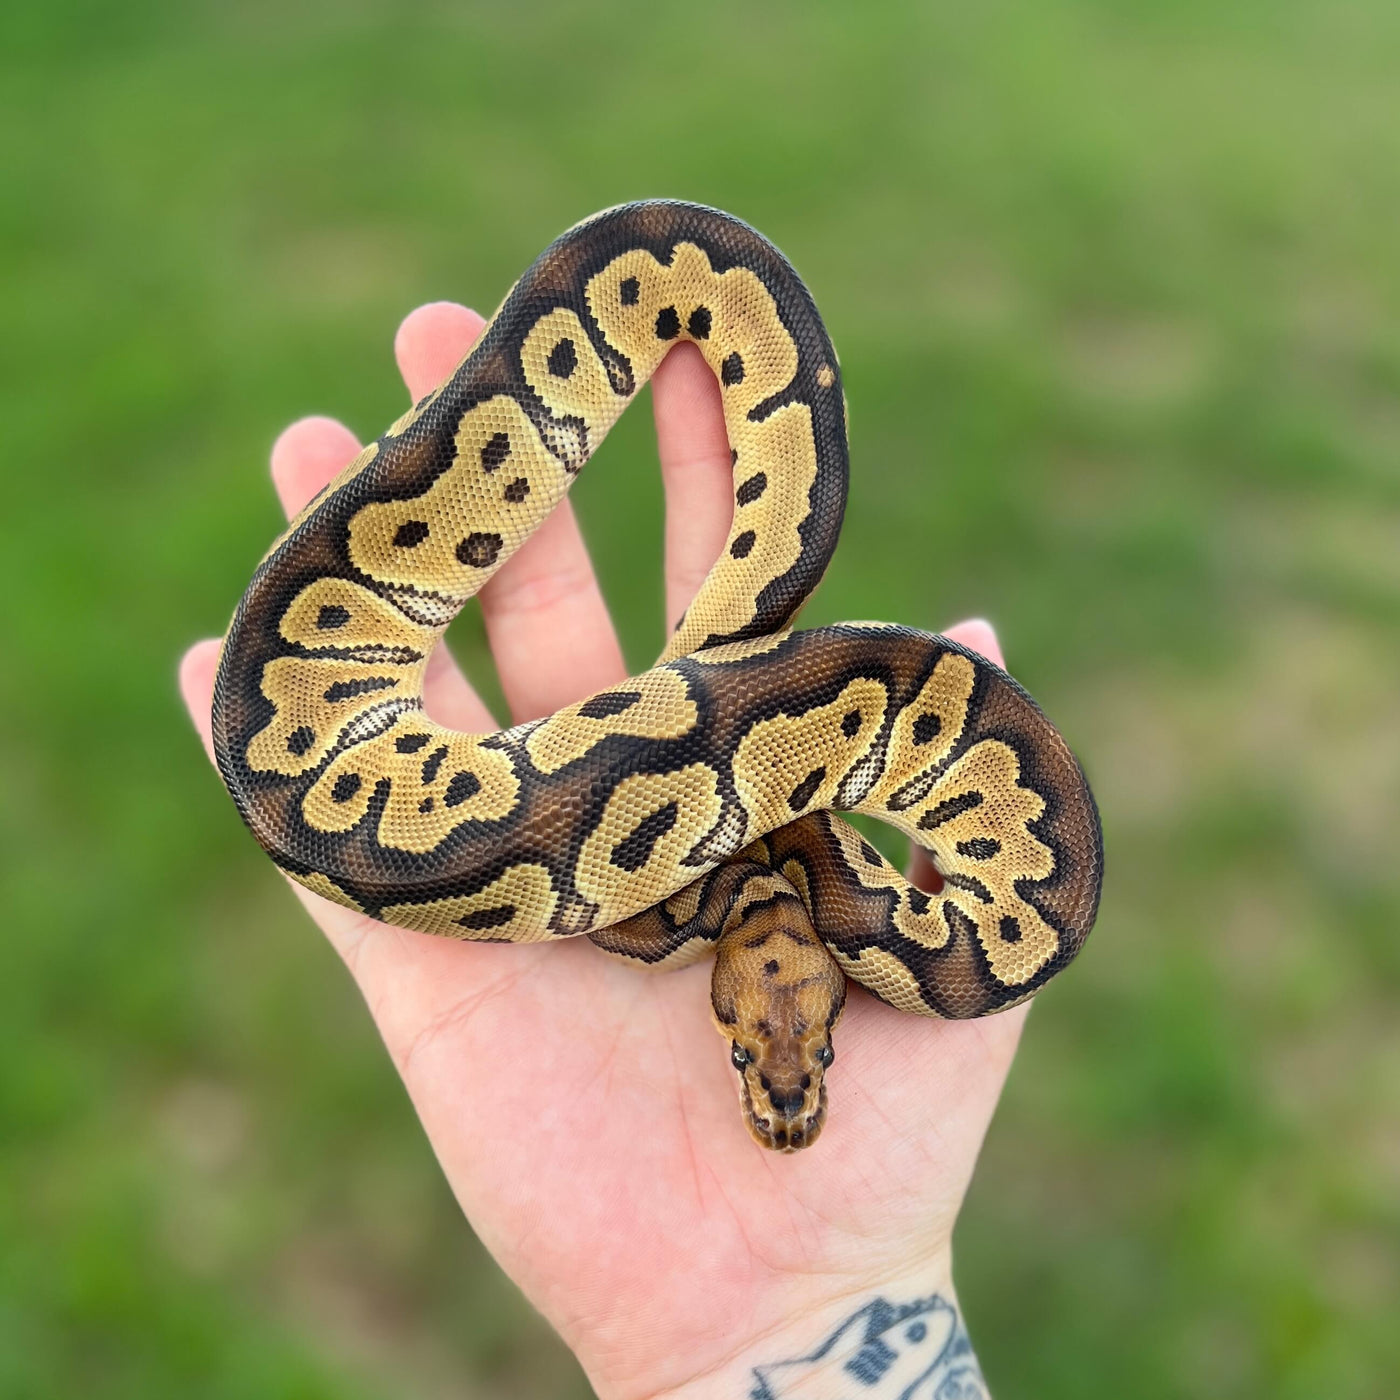 russo clown ball python for sale online, buy super fire ball pythons at cheap prices.